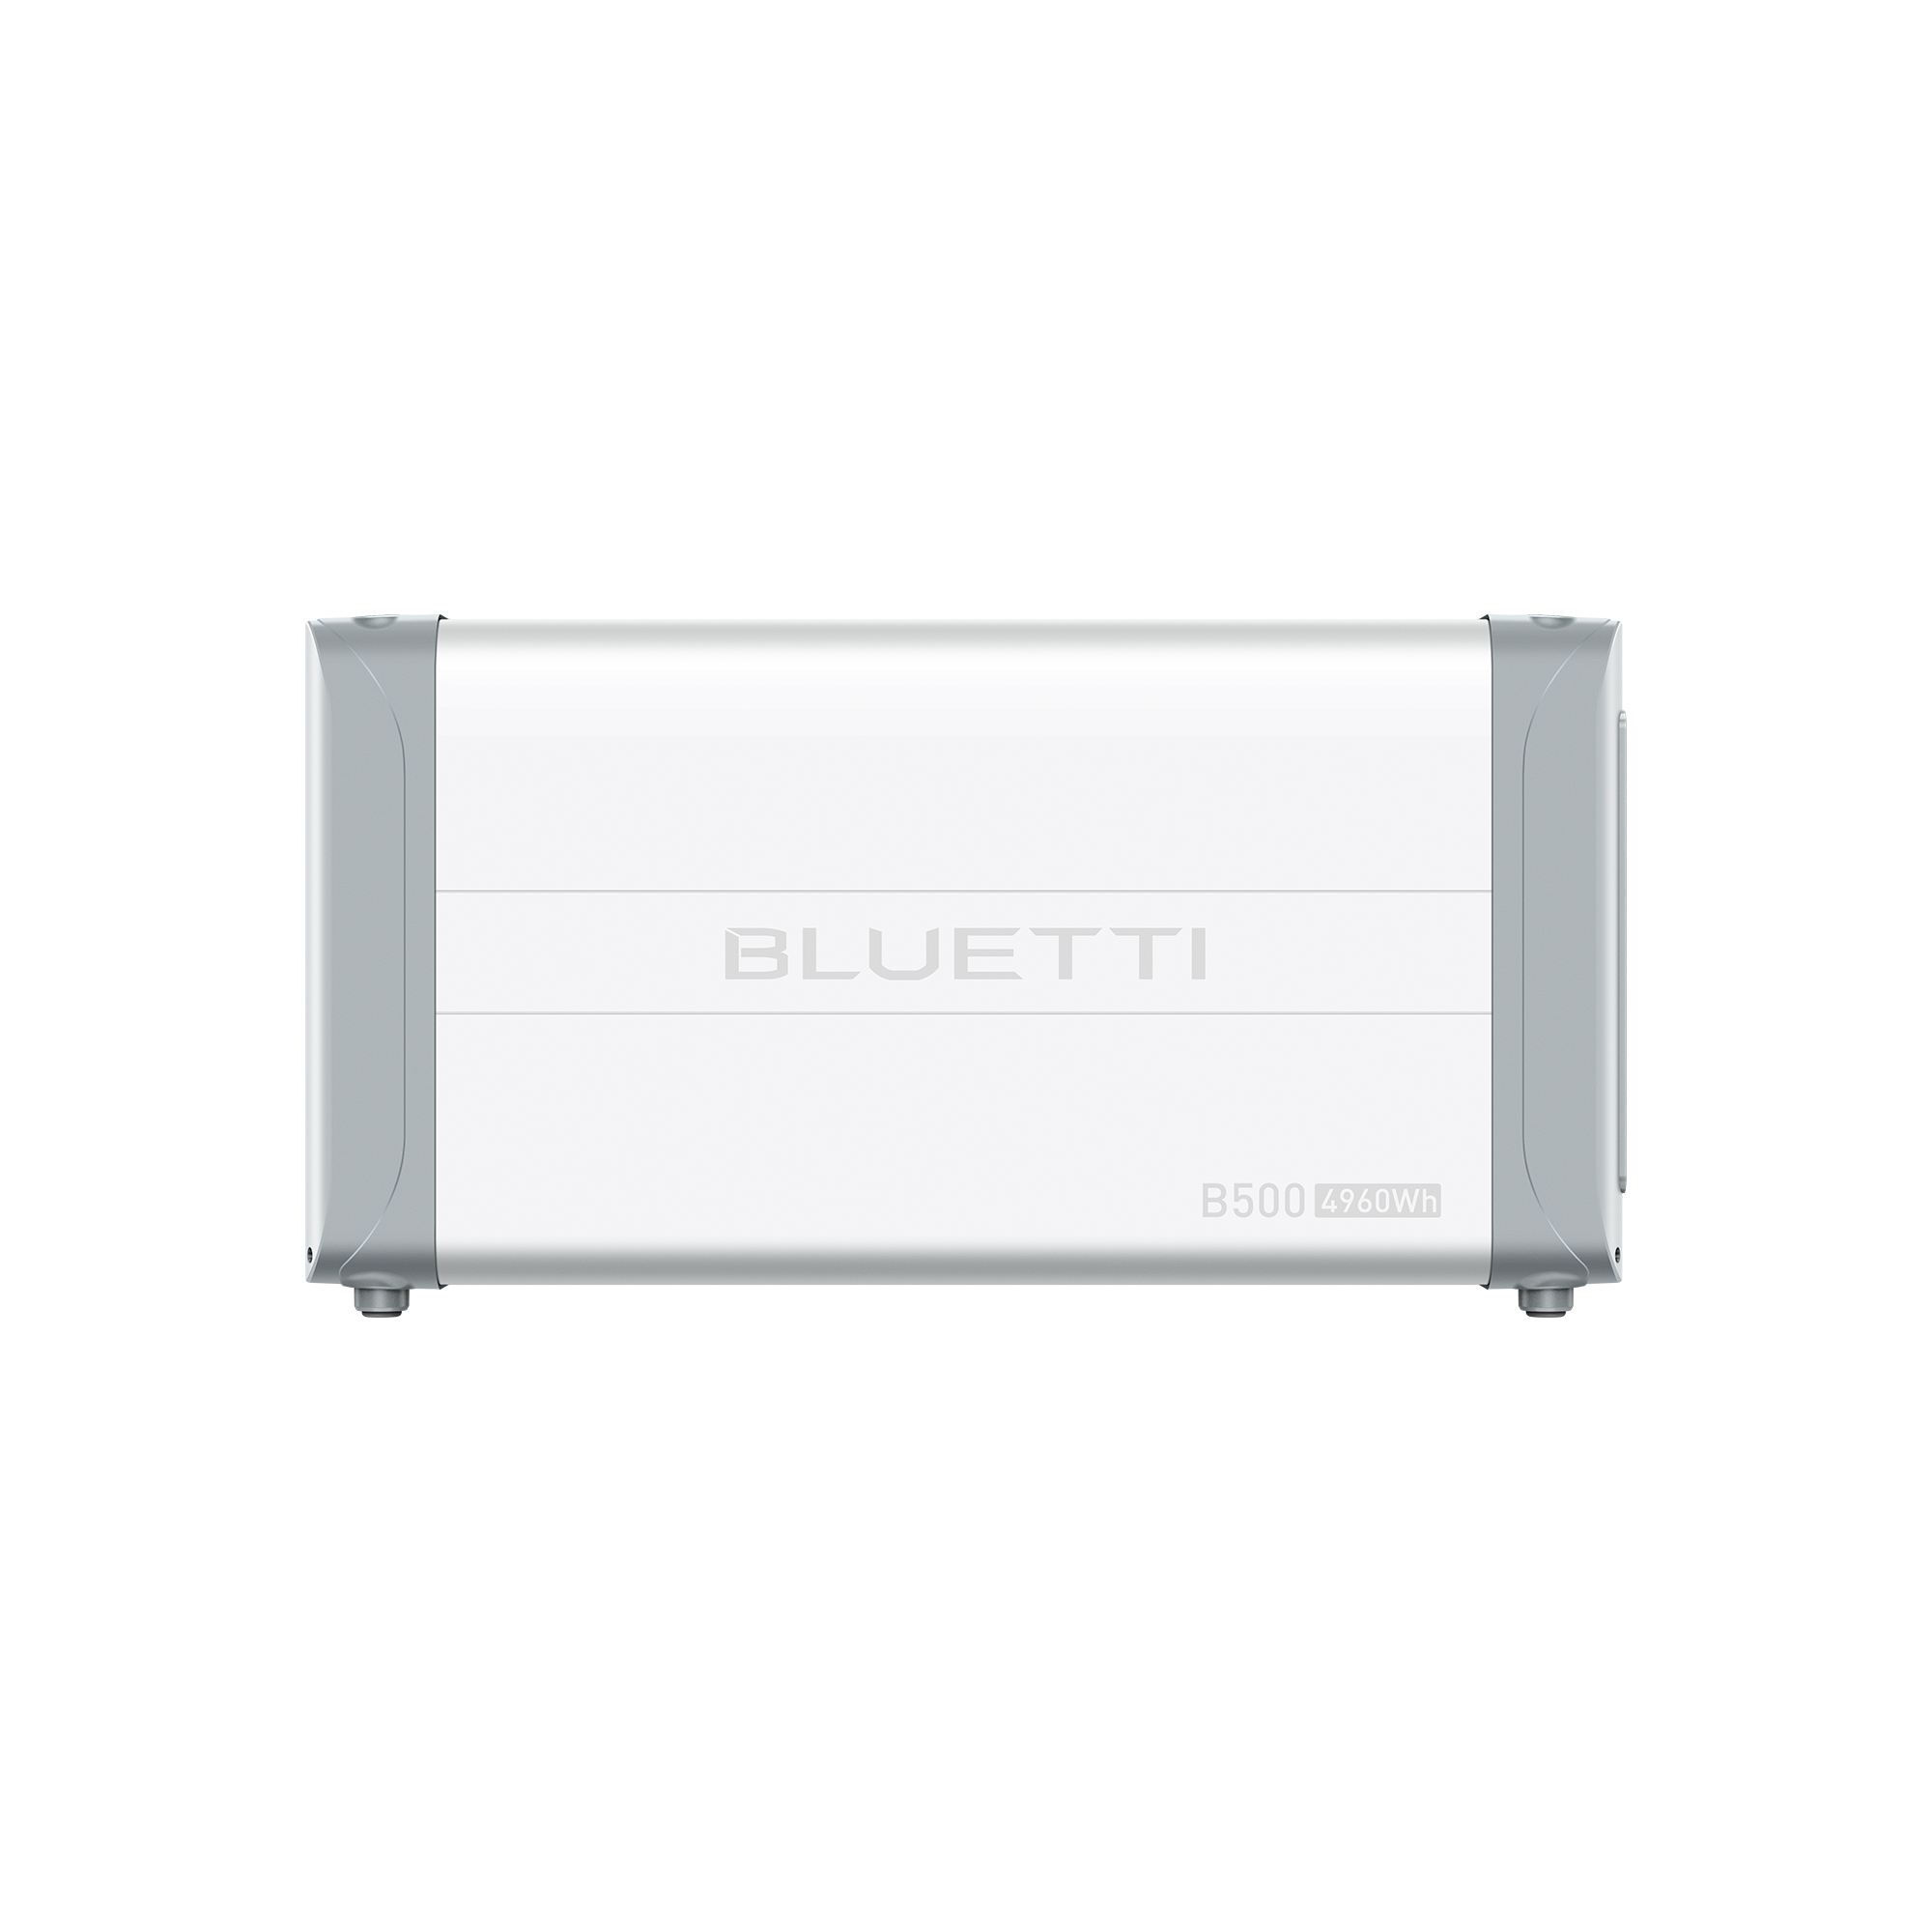 BLUETTI EP900 + B500 Home Battery Backup / Energy Storage System / Grid-tie Home Backup Power B500 / 4960Wh Expansion Battery, Works only with EP900